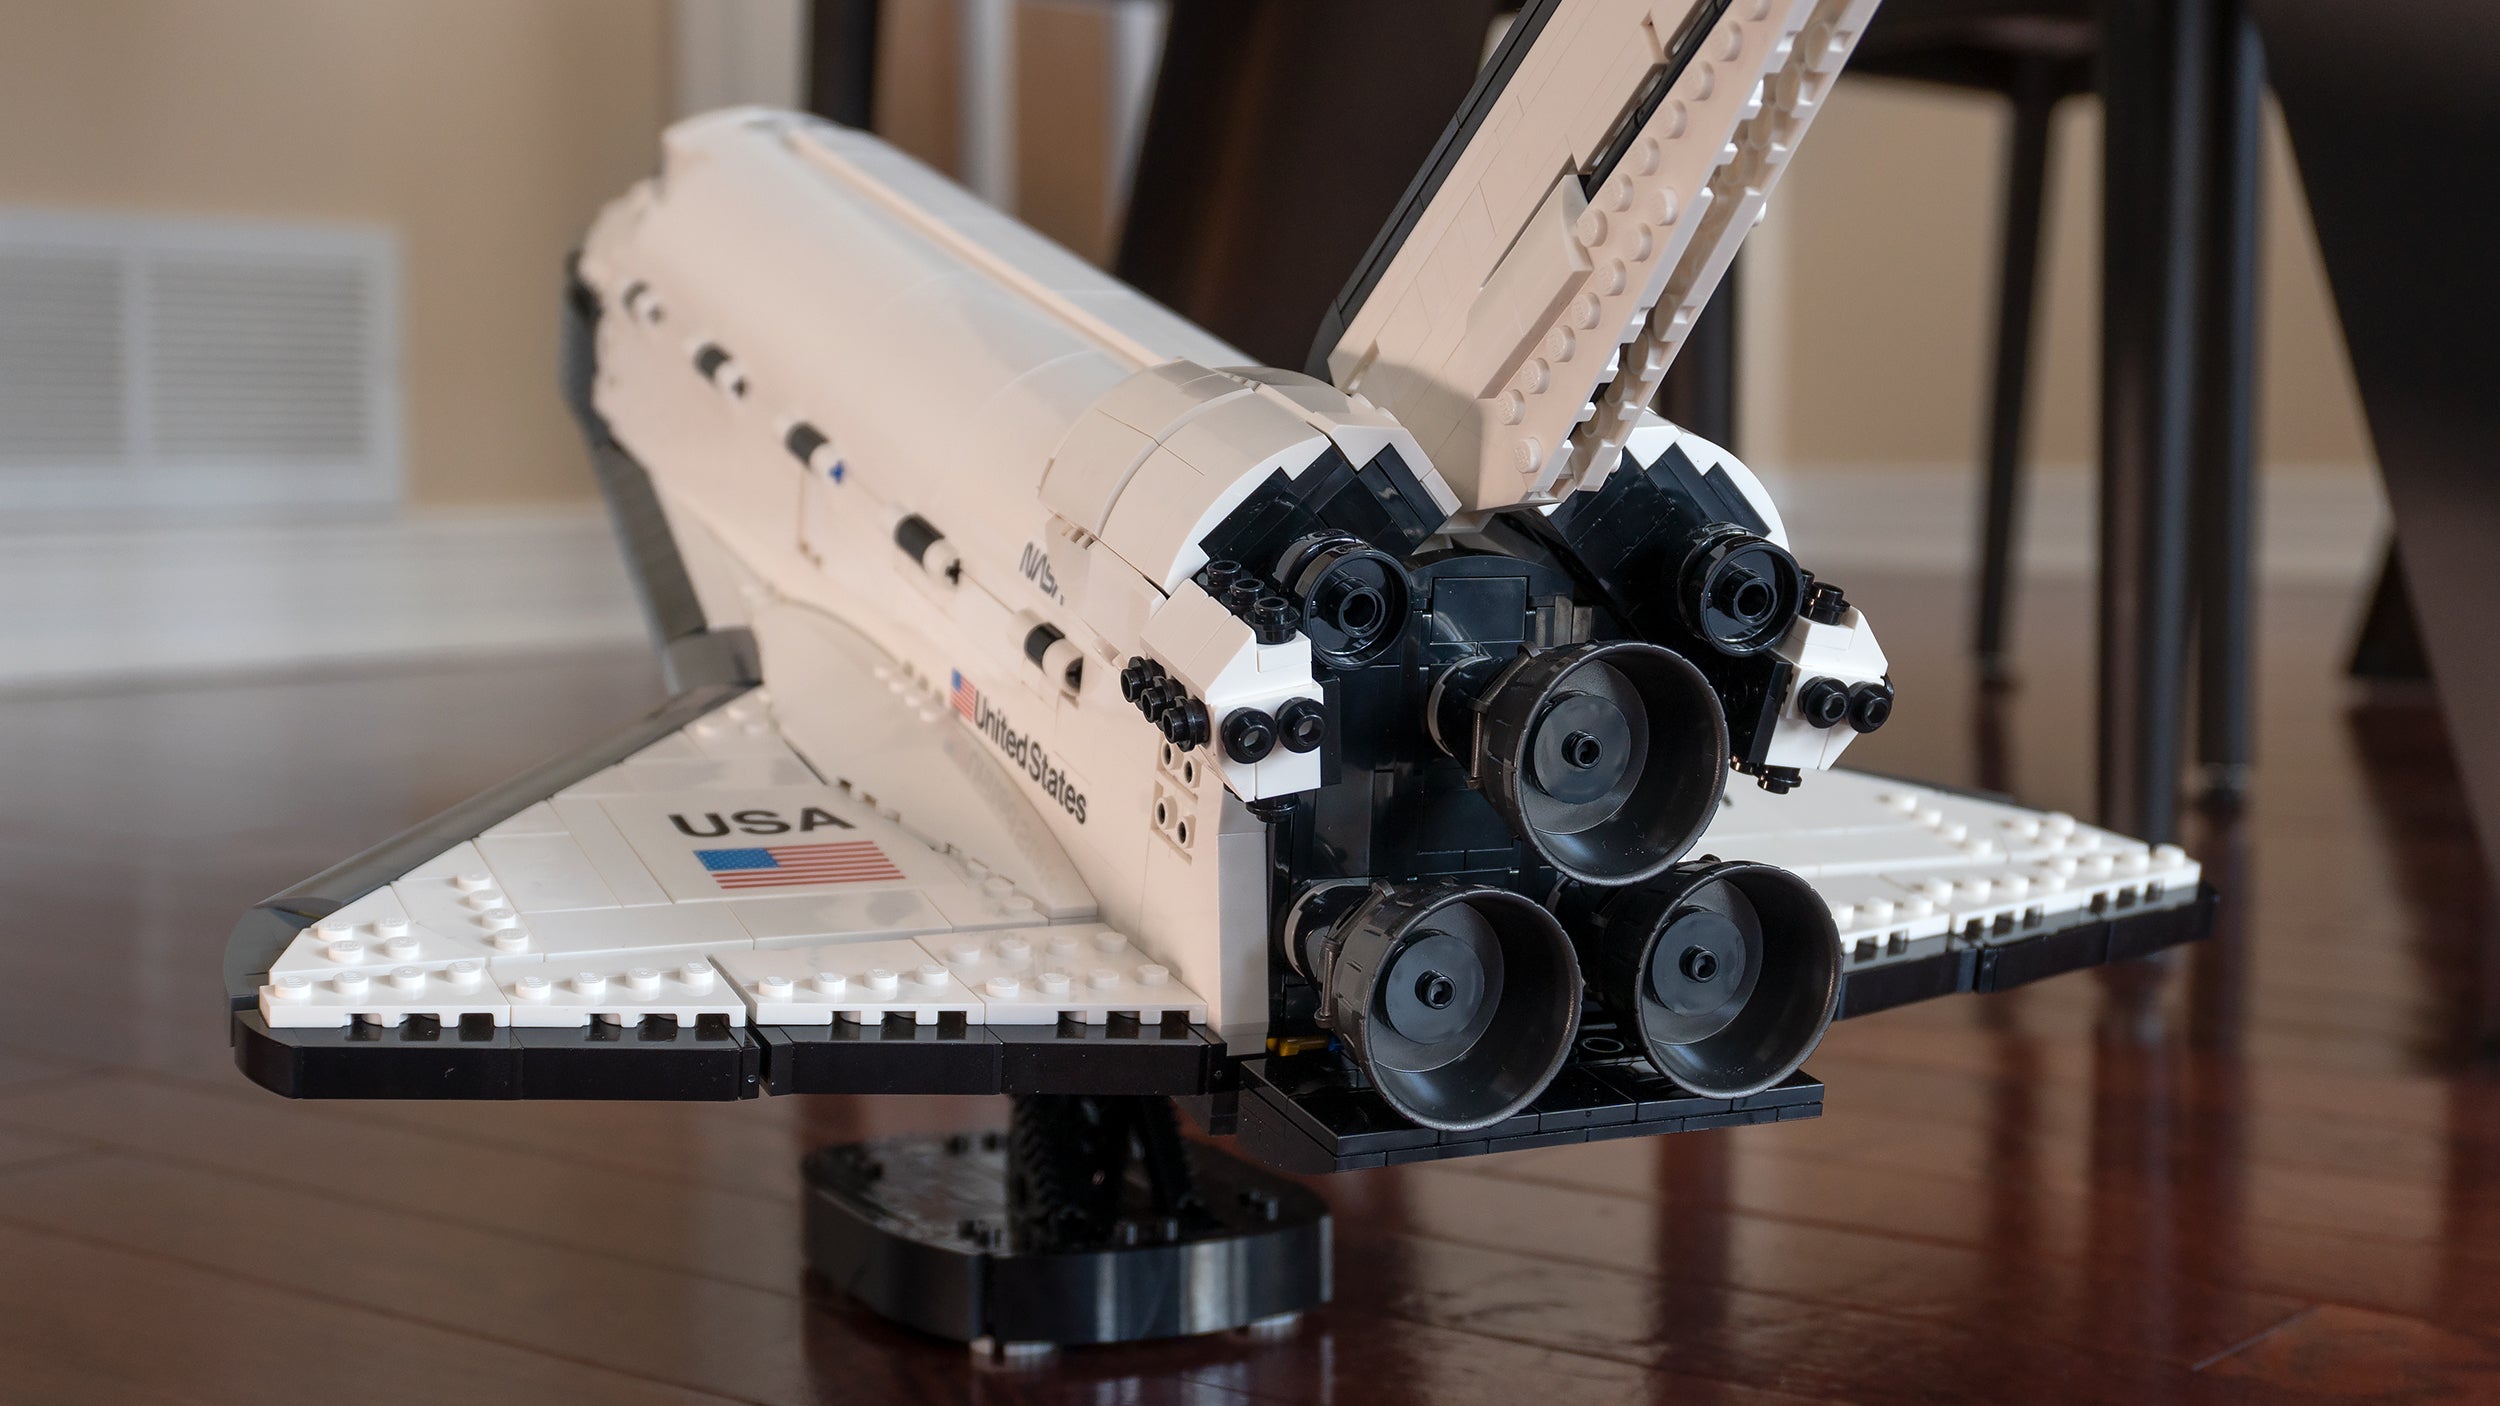 The final results are a great display piece, and the added bits of functionality make for a really enjoyable build. (Photo: Andrew Liszewski/Gizmodo)